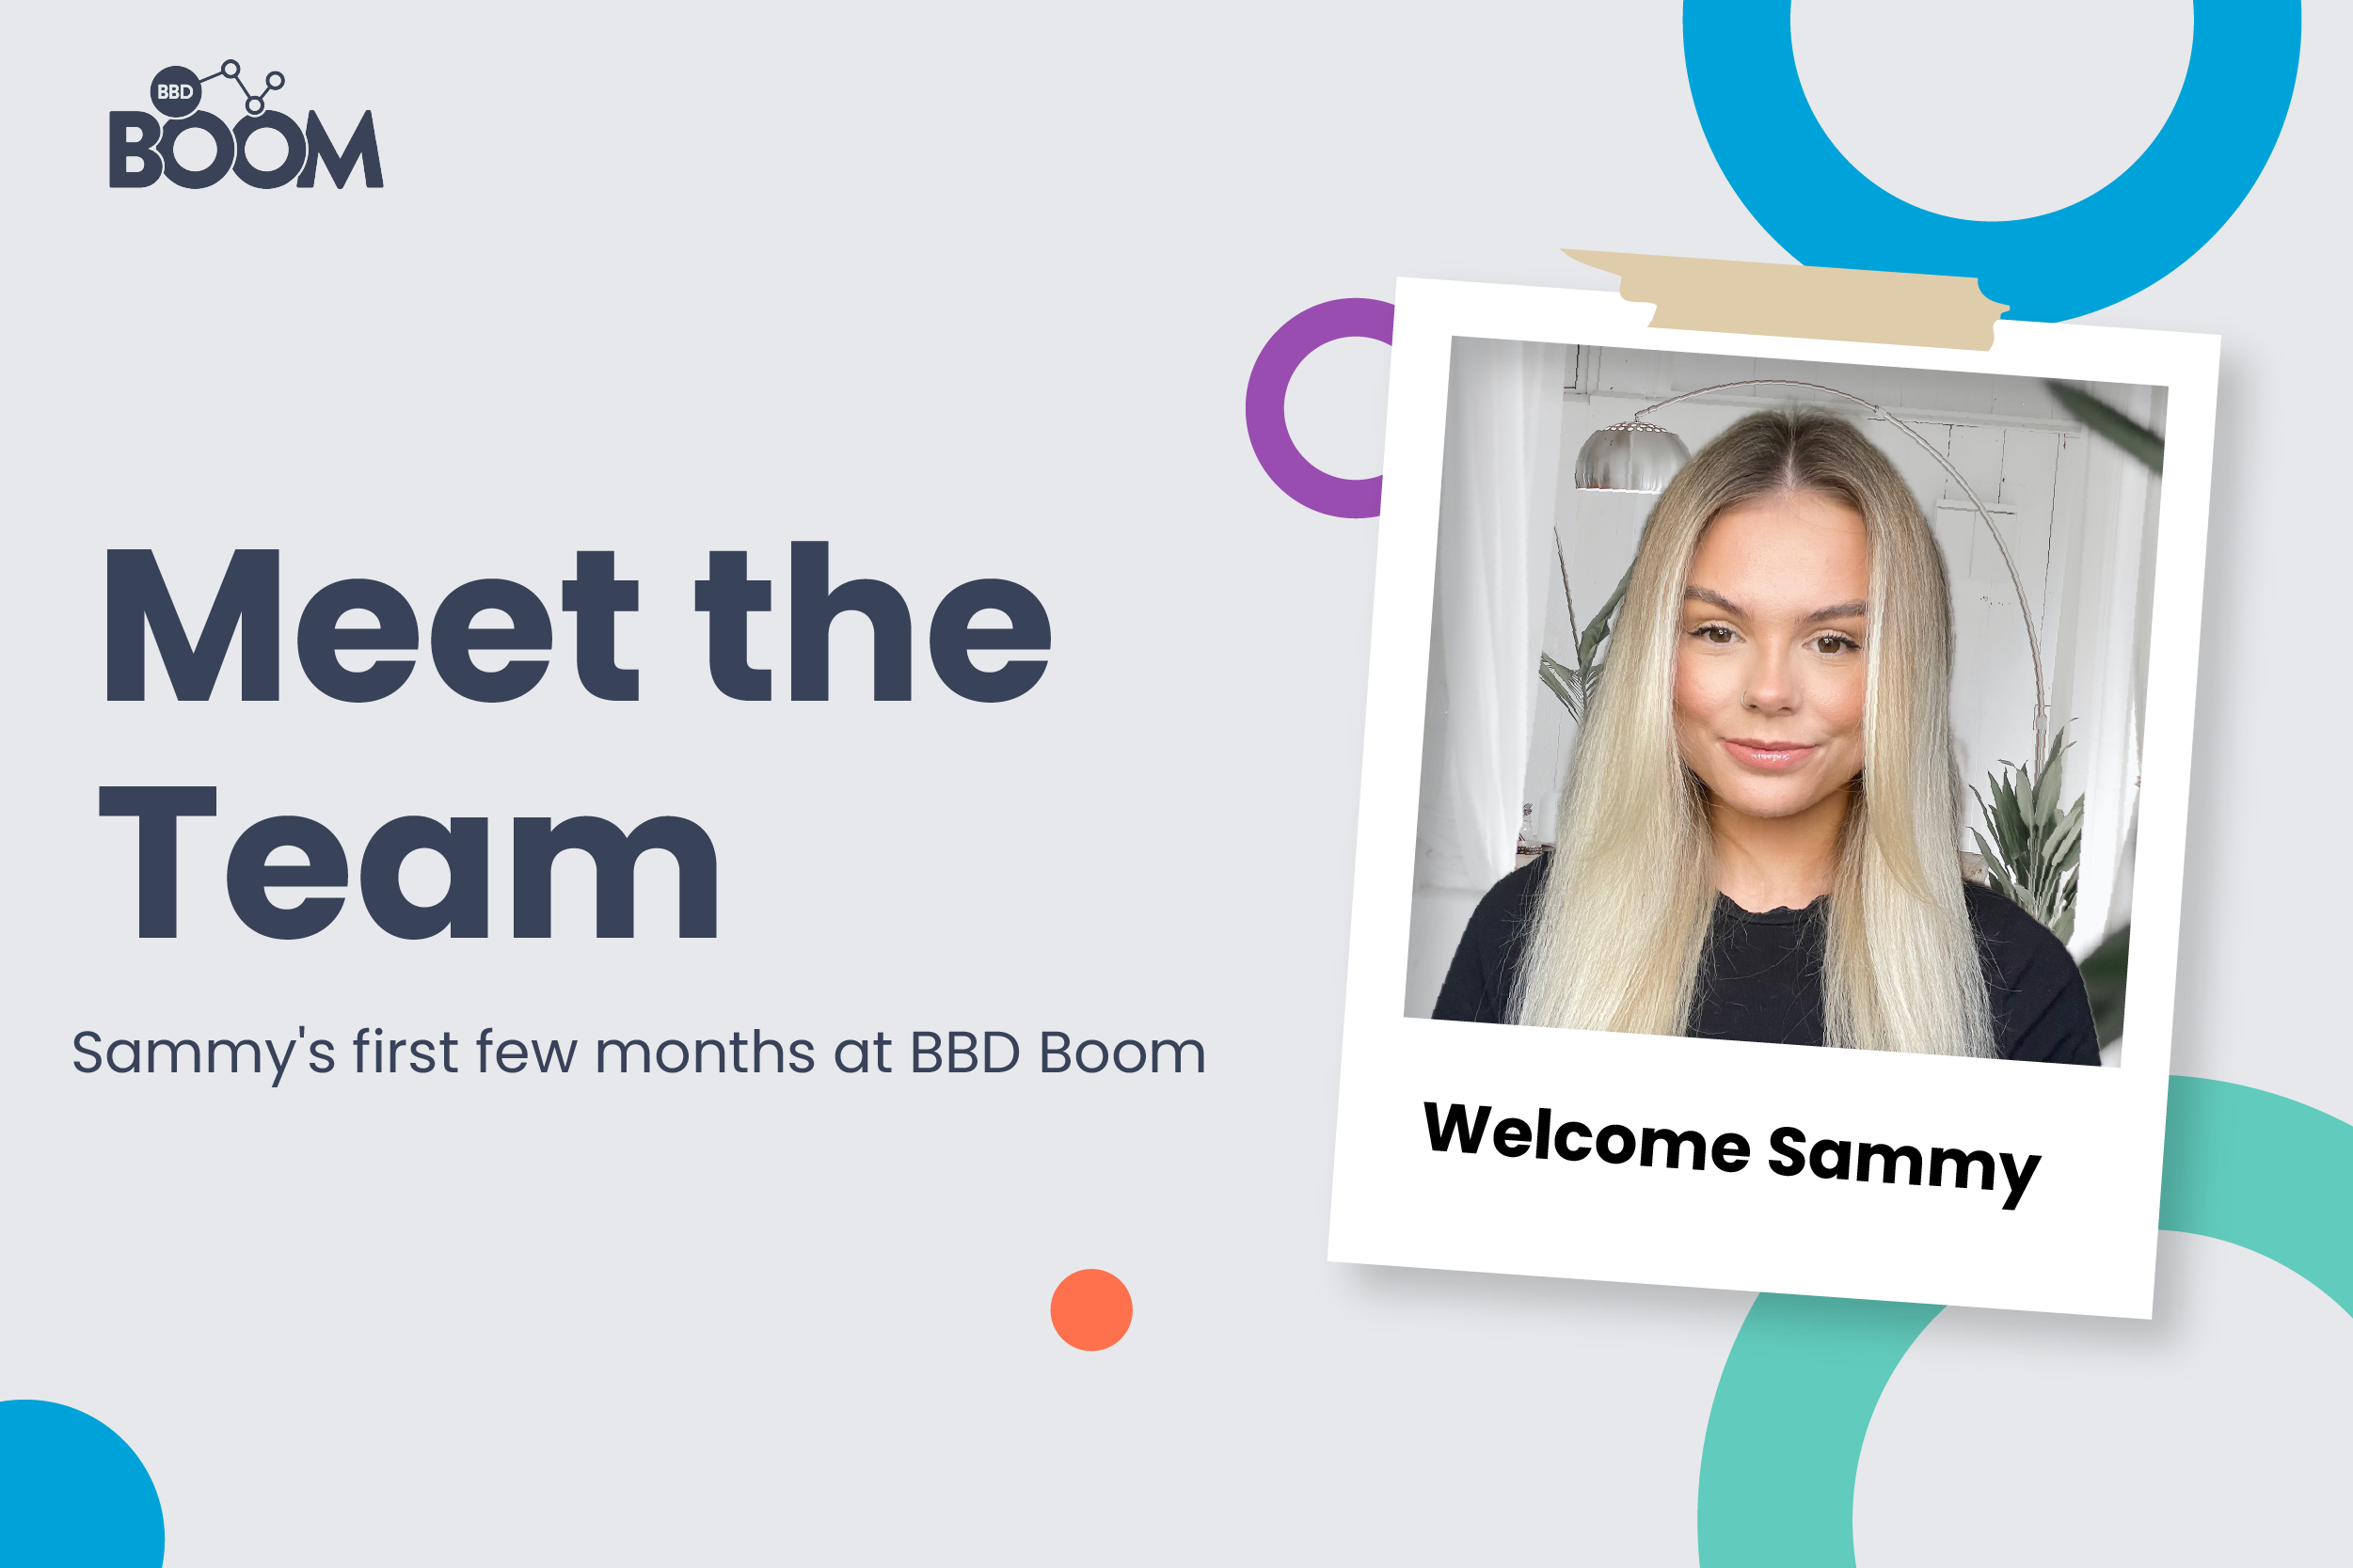 A New Face, A New Chapter: Inside Sammy’s First Few Months at BBD Boom